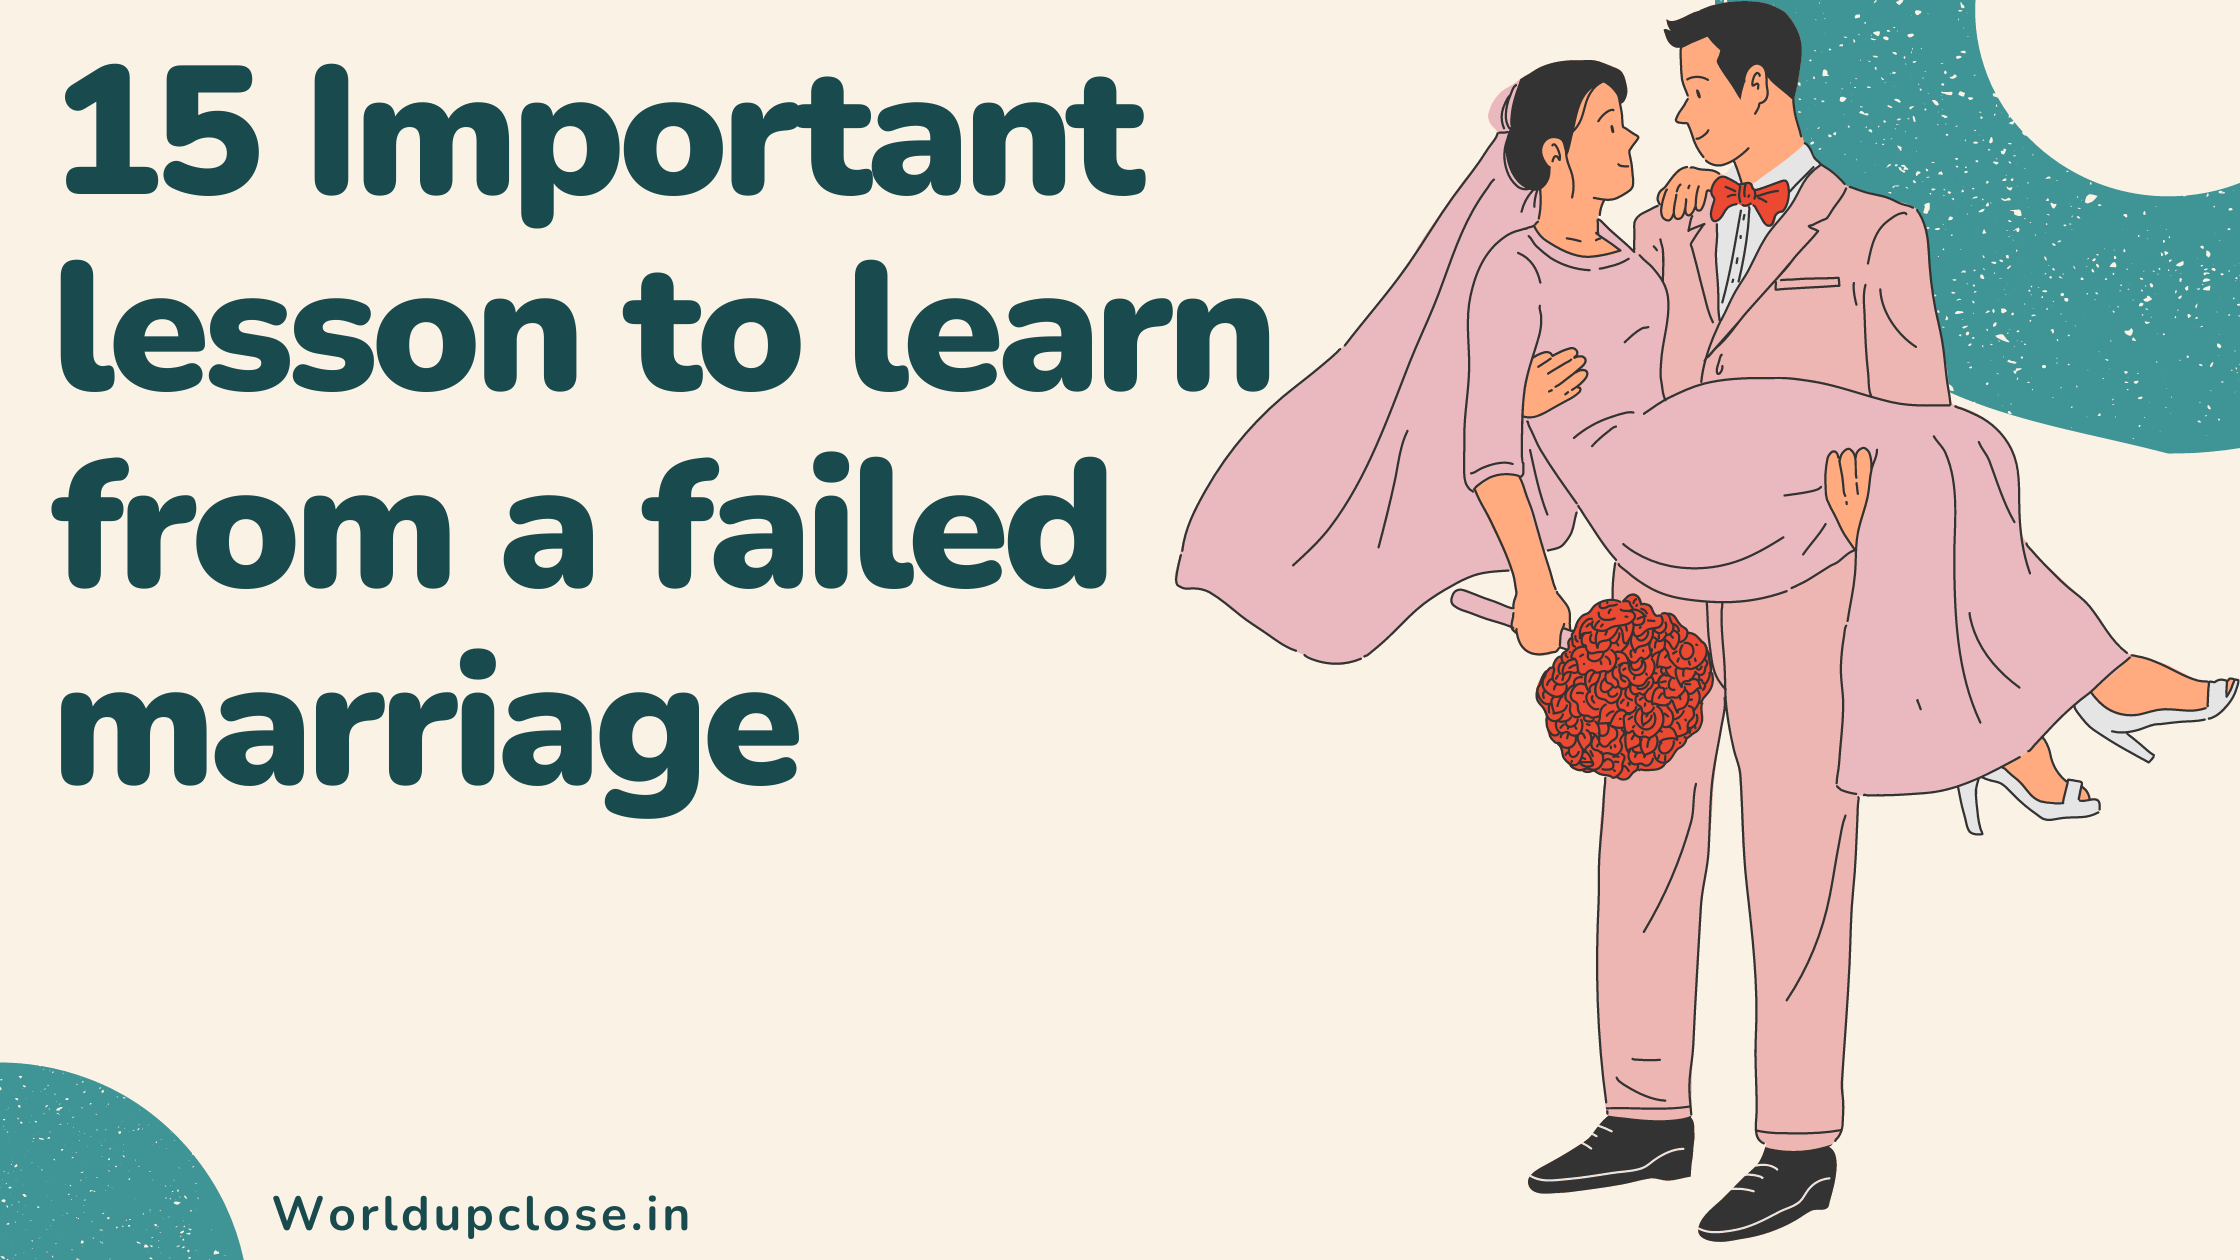 15 Important lesson to learn from a failed marriage 21